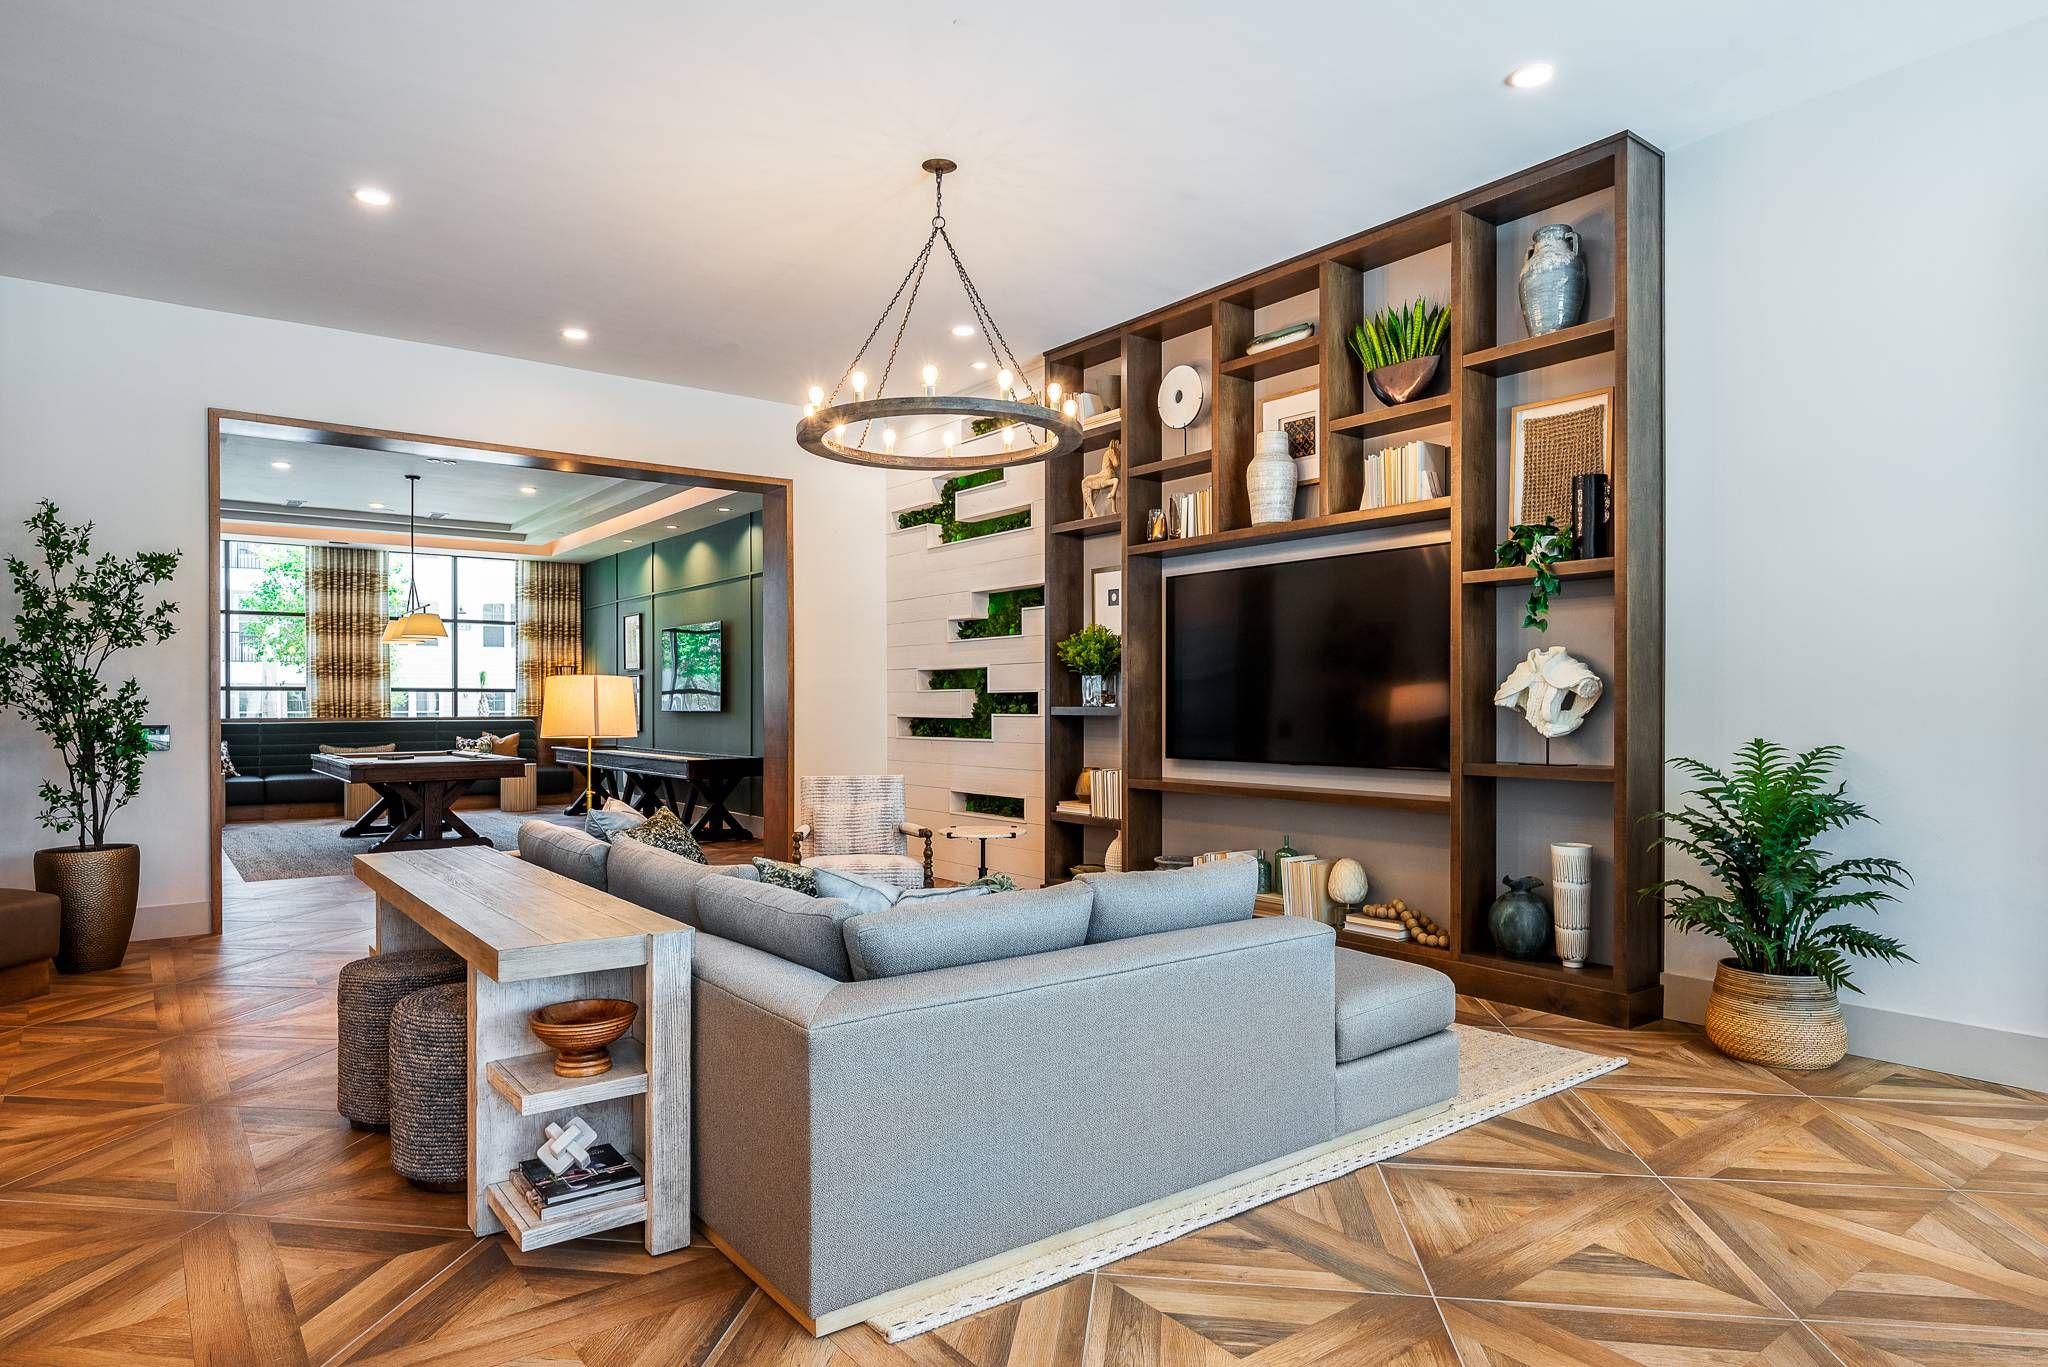 A stylish lounge area with a large gray sofa, wooden bookshelves, and a chic circular chandelier in the common area of Alta at Horizon West.